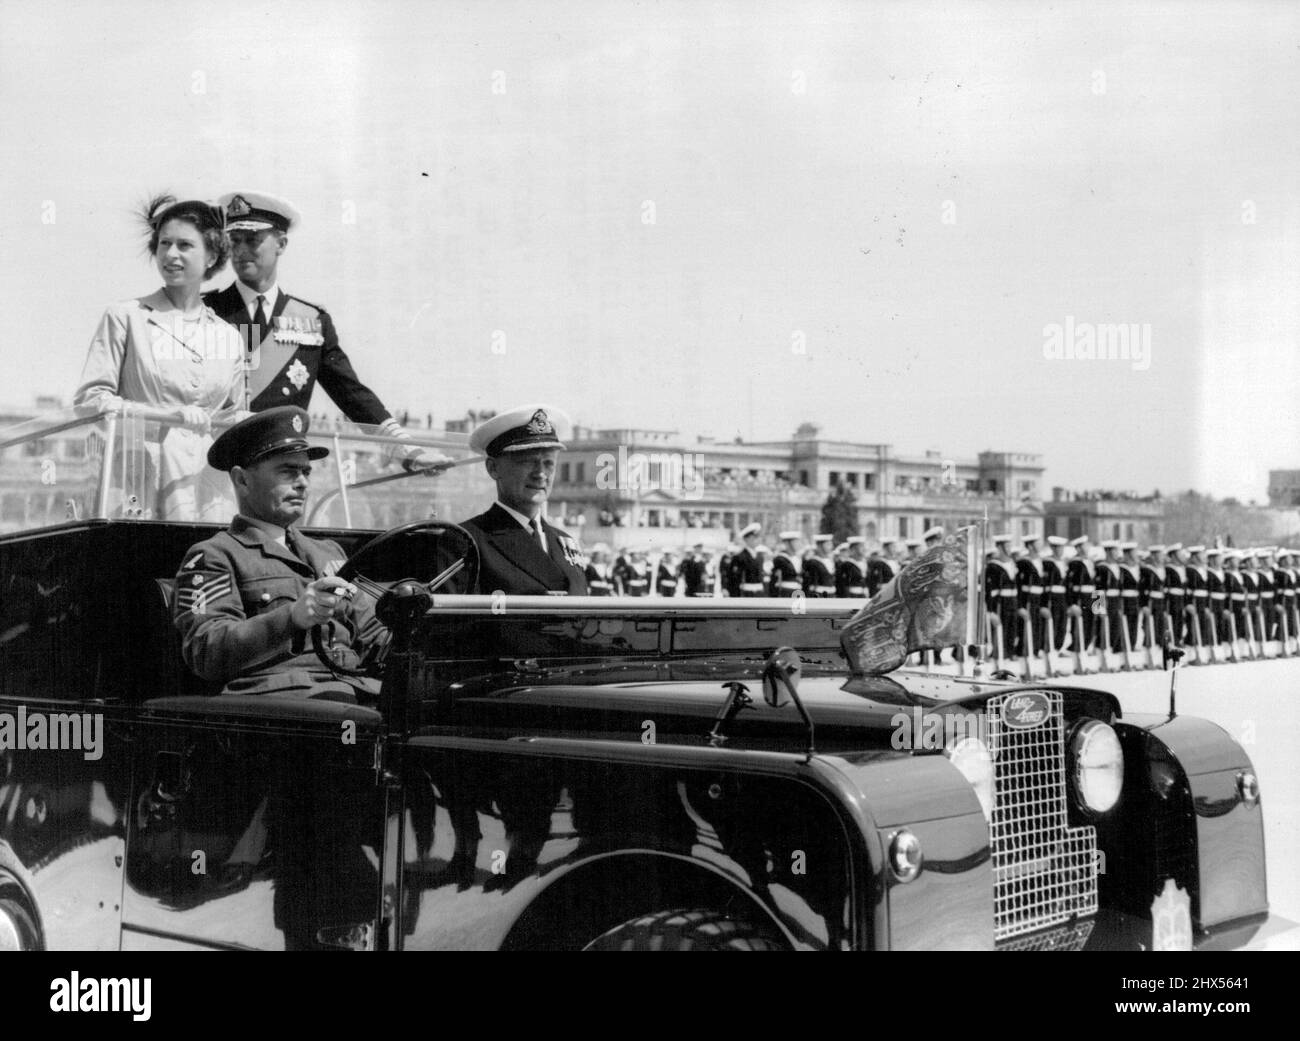 Queen reviews Combined Services Parade In Malta -- The Queen and Duke of Edinburgh inspect the parade from a land rover. H.M. the Queen and Duke of Edinburgh reviewed a combined services parade at Florianna, Malta, yesterday. Prince Charles and Princess Anne came ashore from the royal yacht Britannia to watch the parade from a hotel balcony. May 5, 1954. (Photo by Paul Popper, Paul Popper Ltd.). Stock Photo